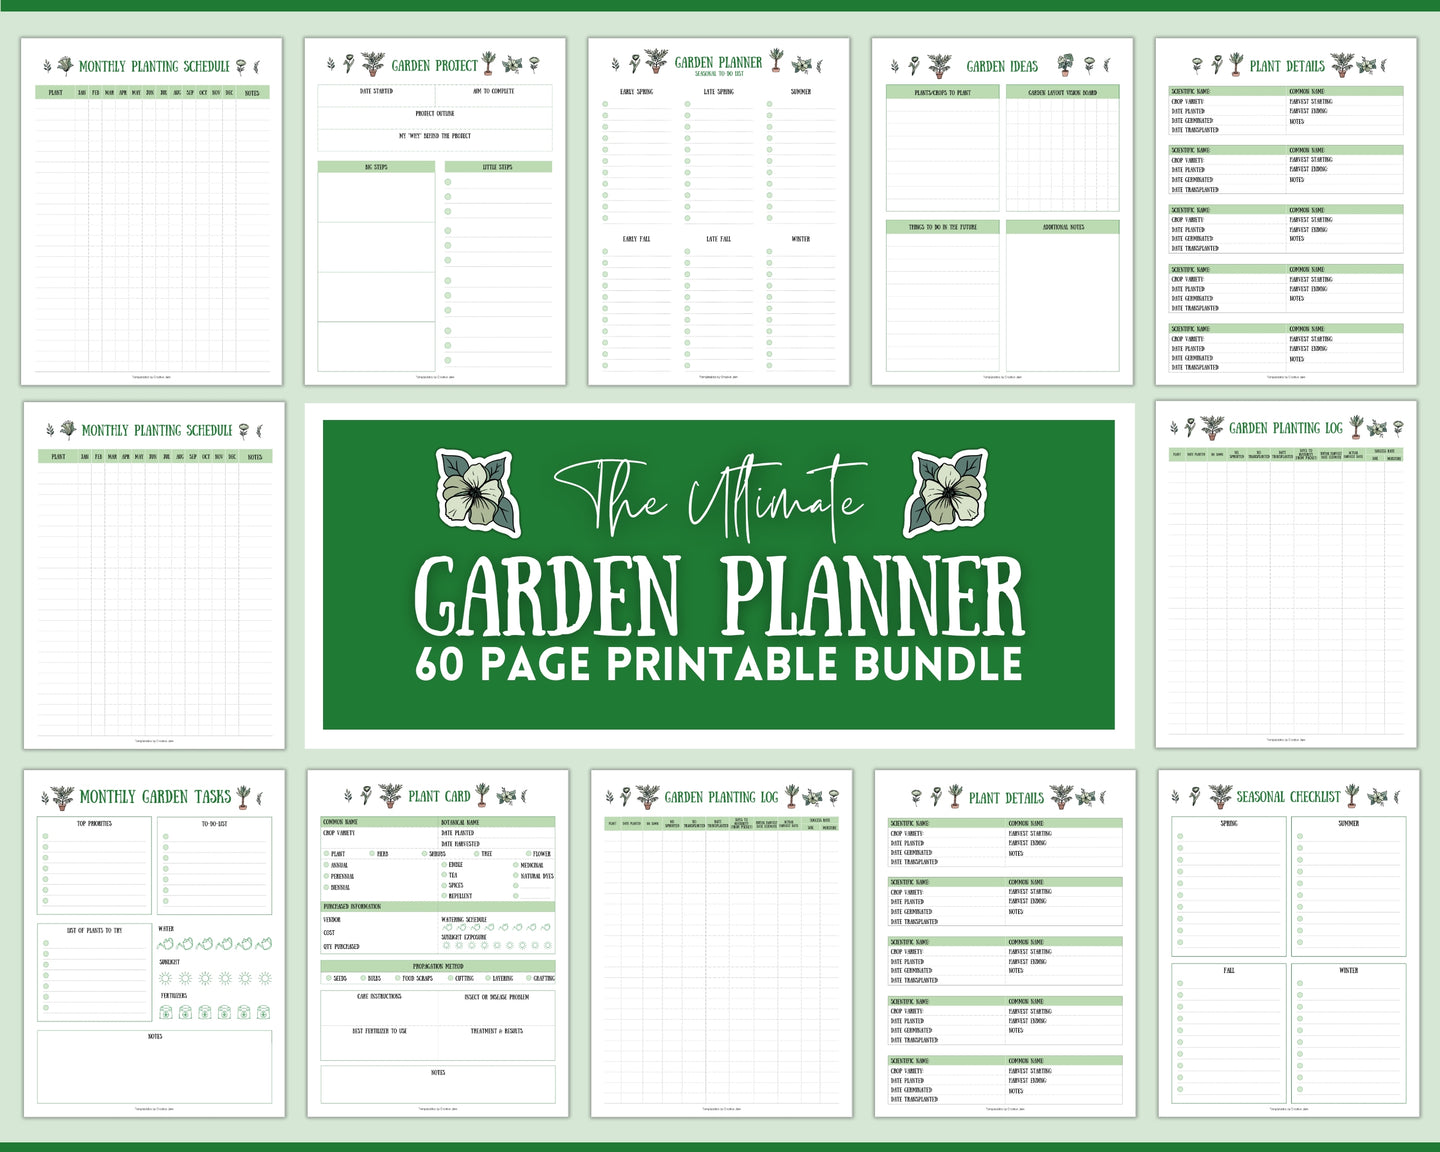 2024 Garden Planner | Gardening Planner With Plant Journal, Planting Calendar, Plant Care, Seed Starting, Garden Book & Plant Notes | Green